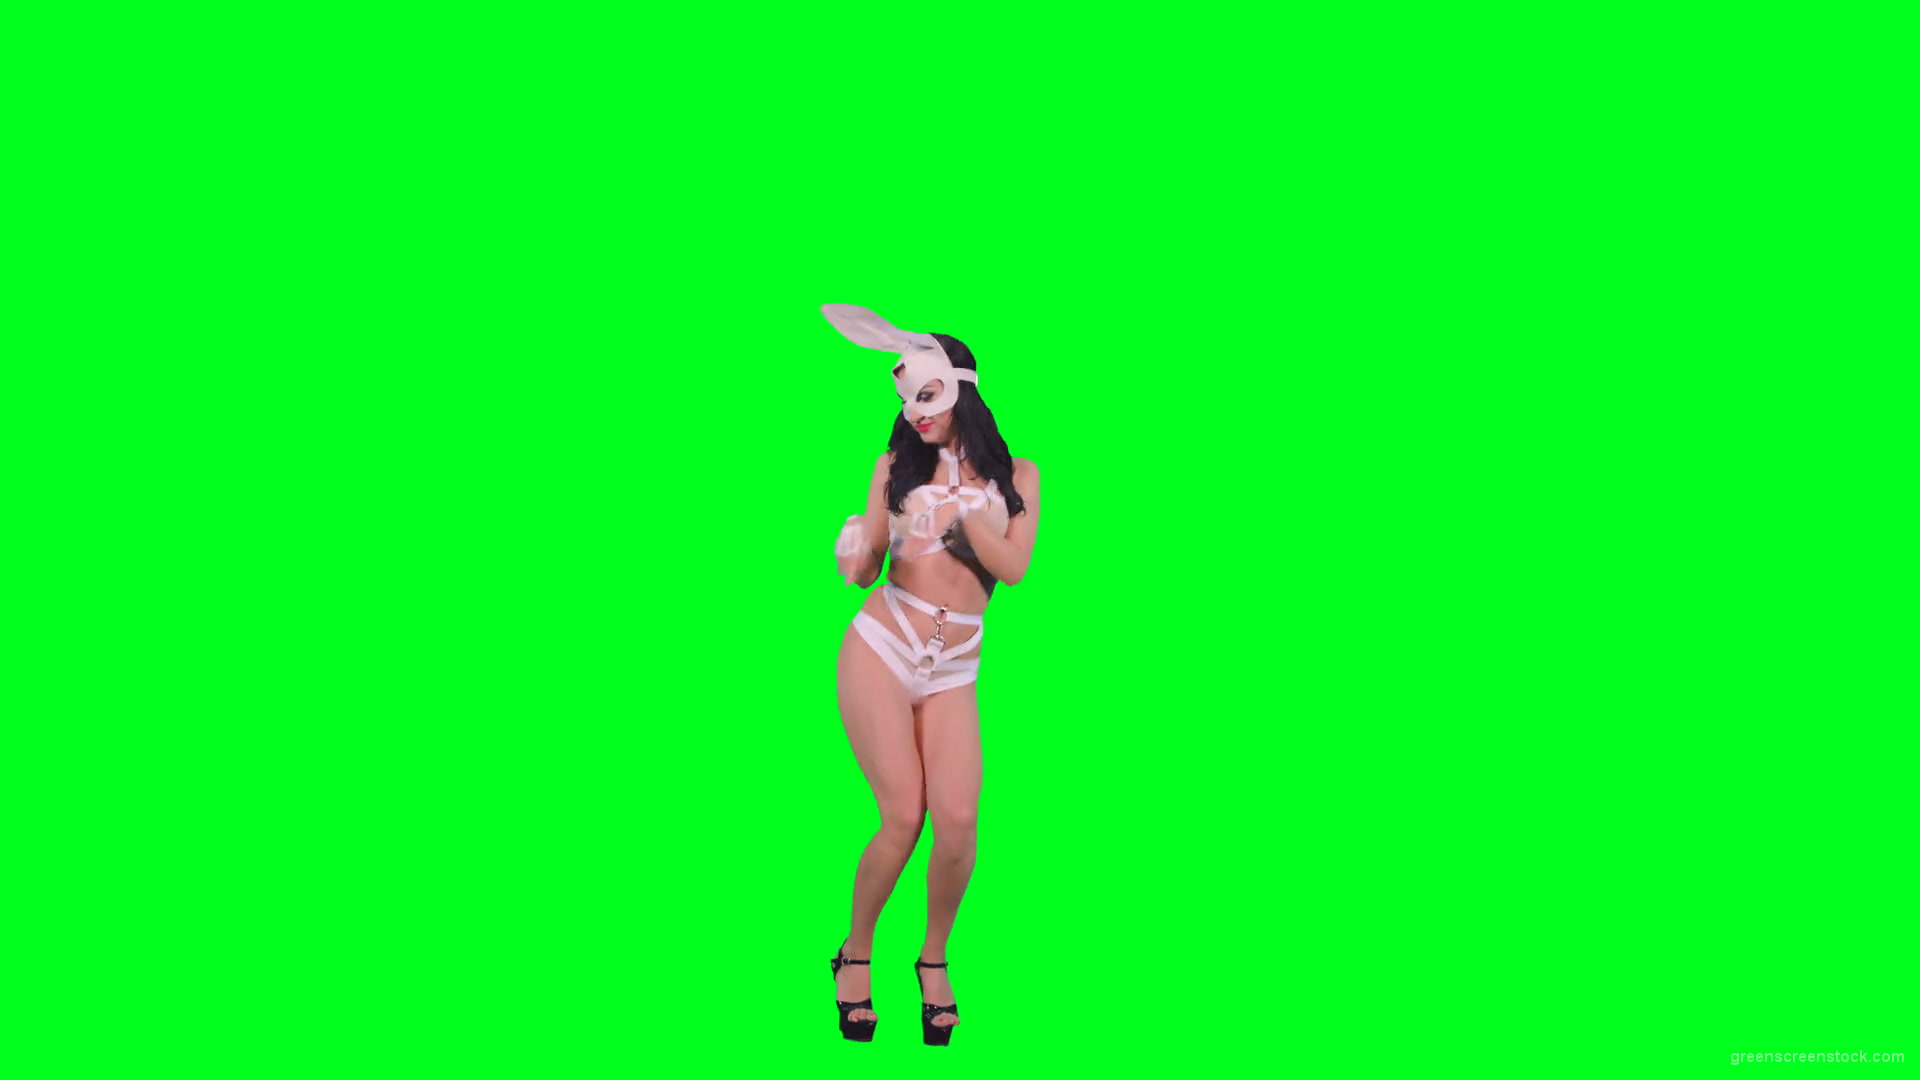 Hot-Go-go-Dancing-girl-is-jumping-over-green-screen-4K-Video-Footage-1920_006 Green Screen Stock